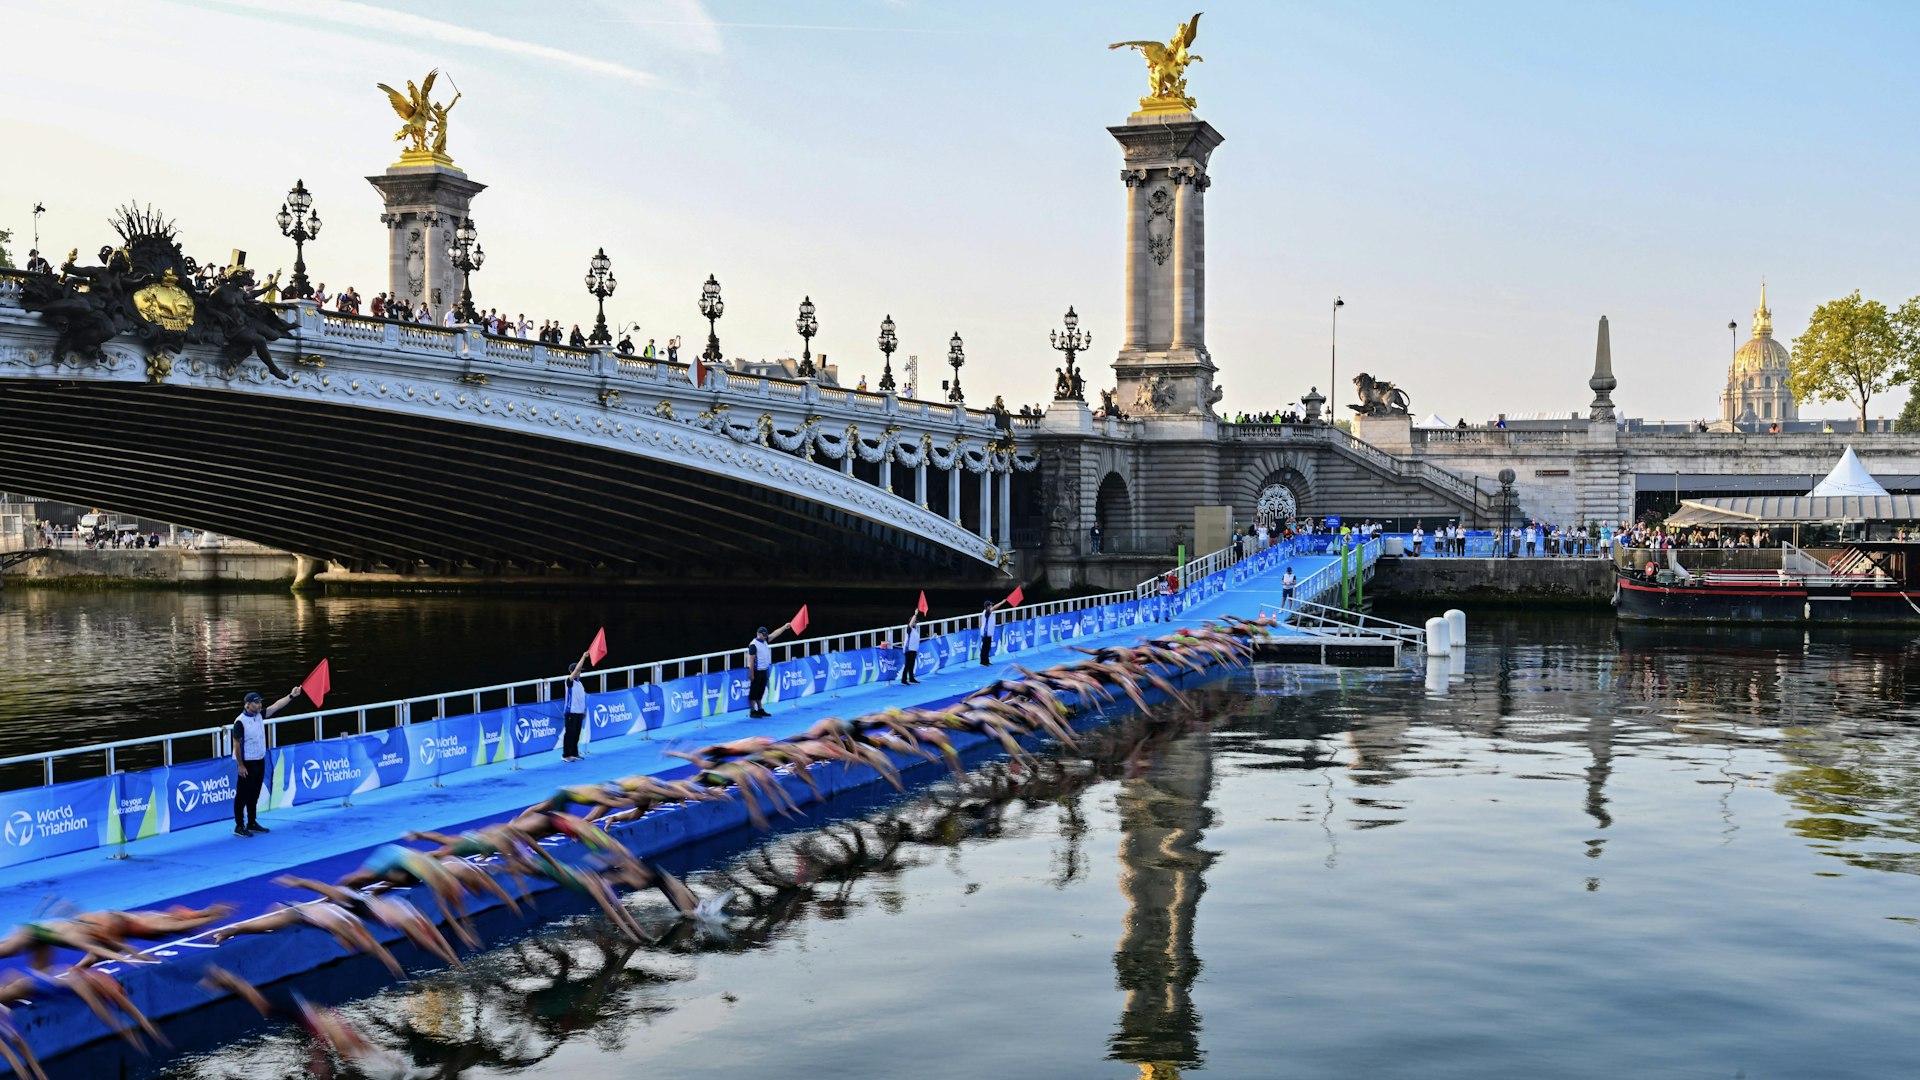 Triathlon athletes start to compete swimming in the Seine river next to the Alexandre III bridge during a Test Event for the women's triathlon